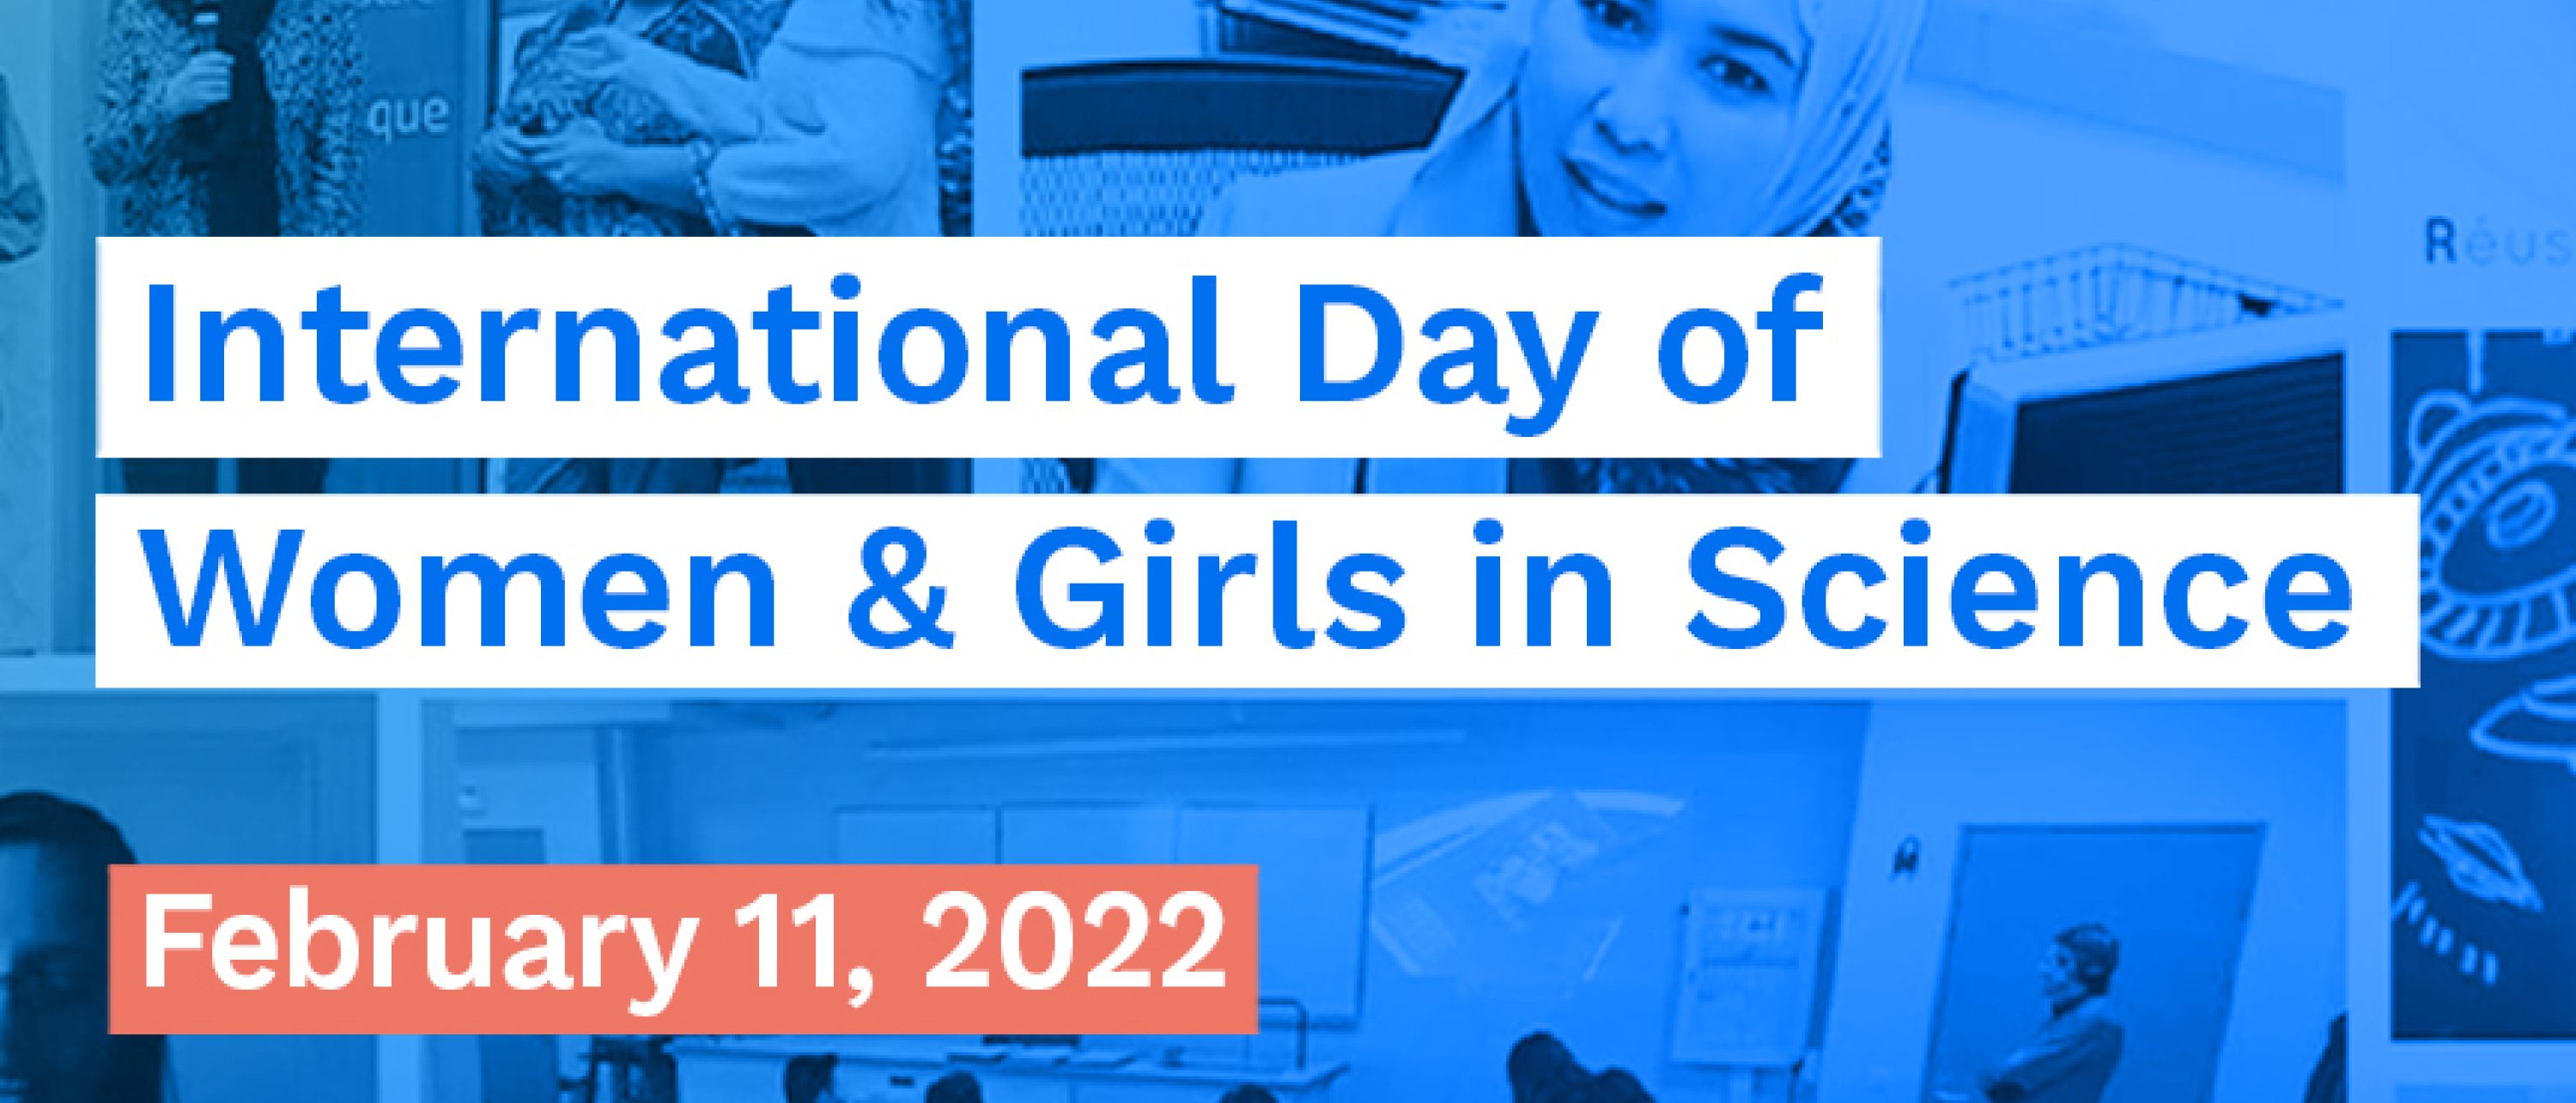 UN-International-Day-of-Women-and-Girls-in-Science-banner-image